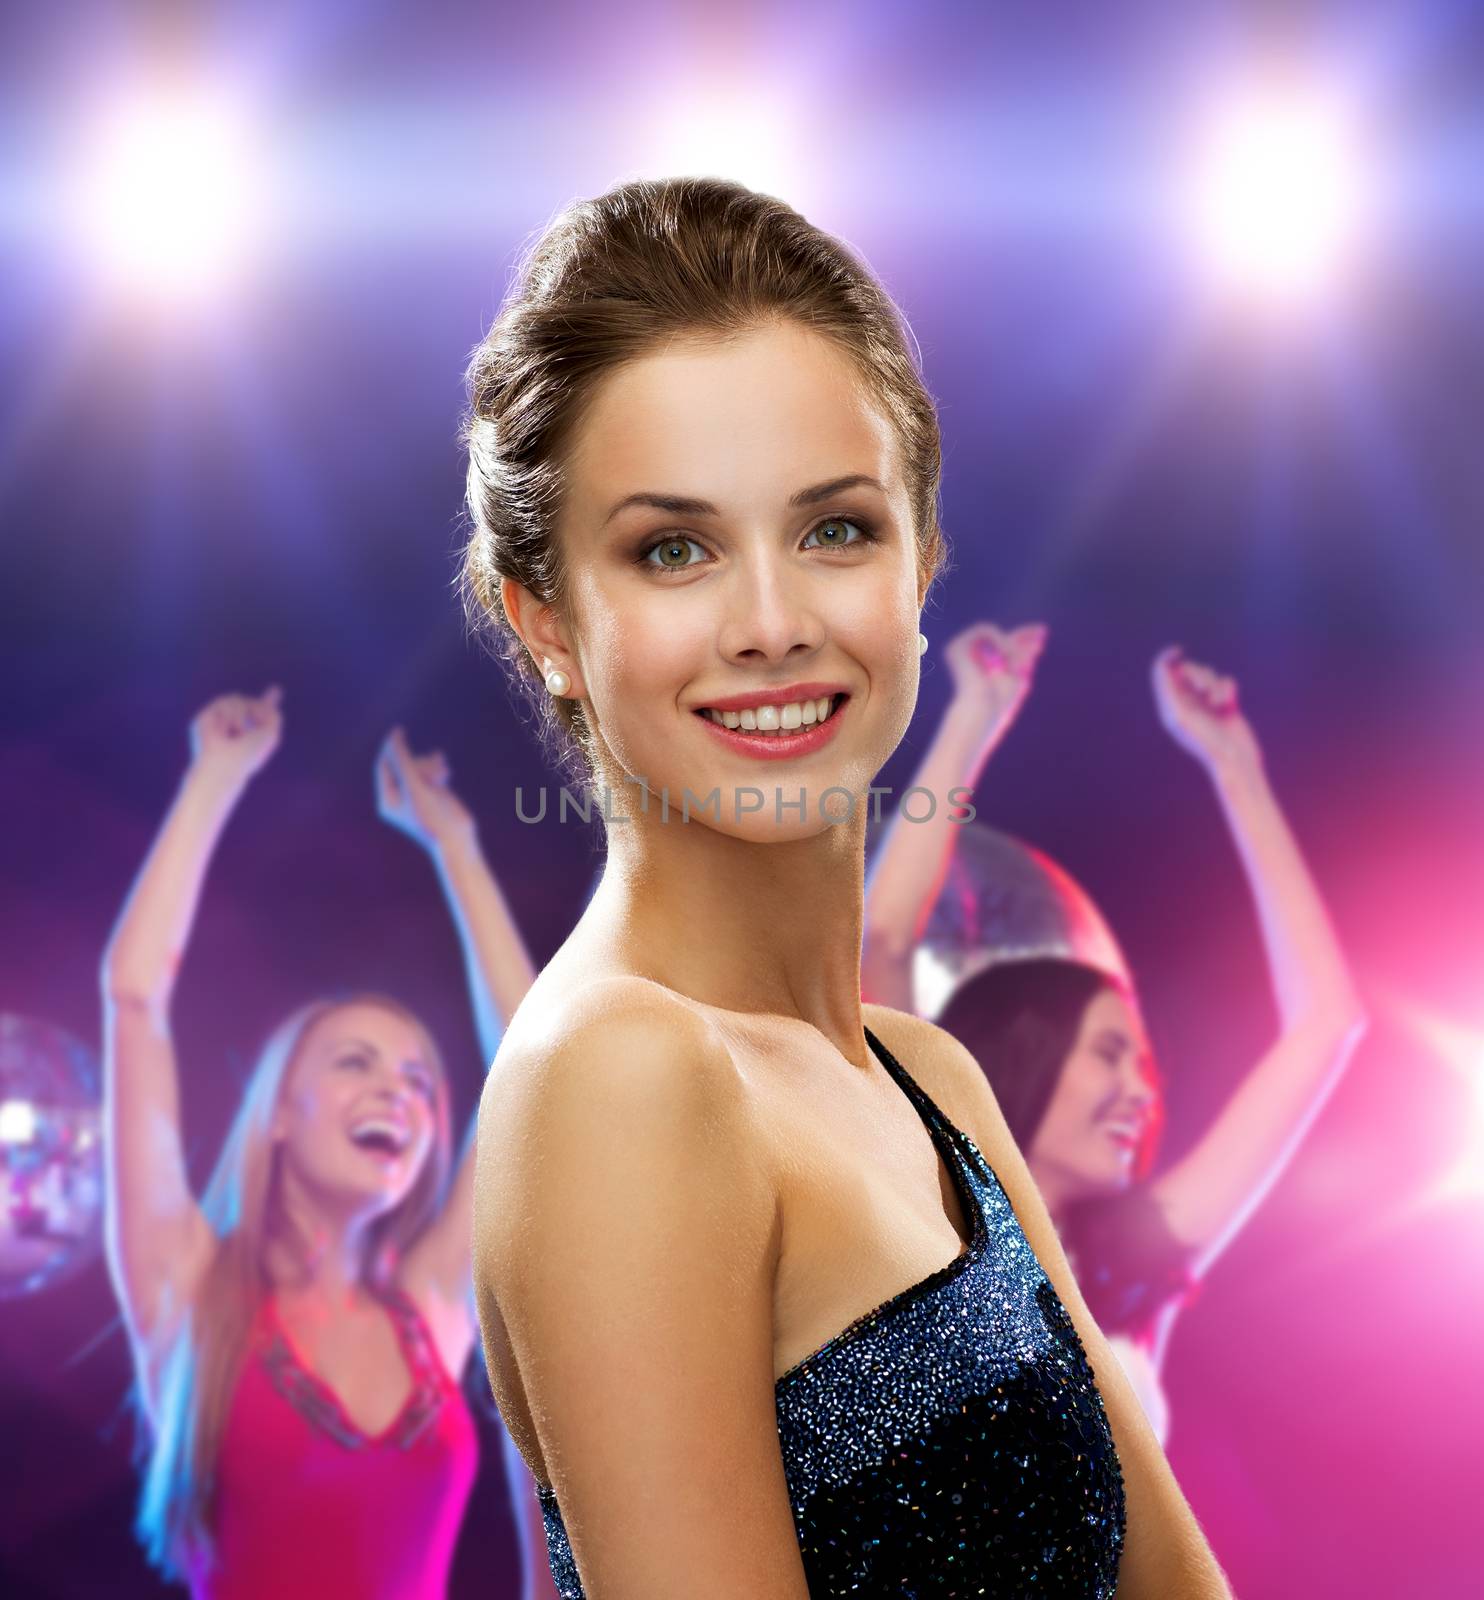 holidays, party and people concept - smiling woman in evening dress over disco background